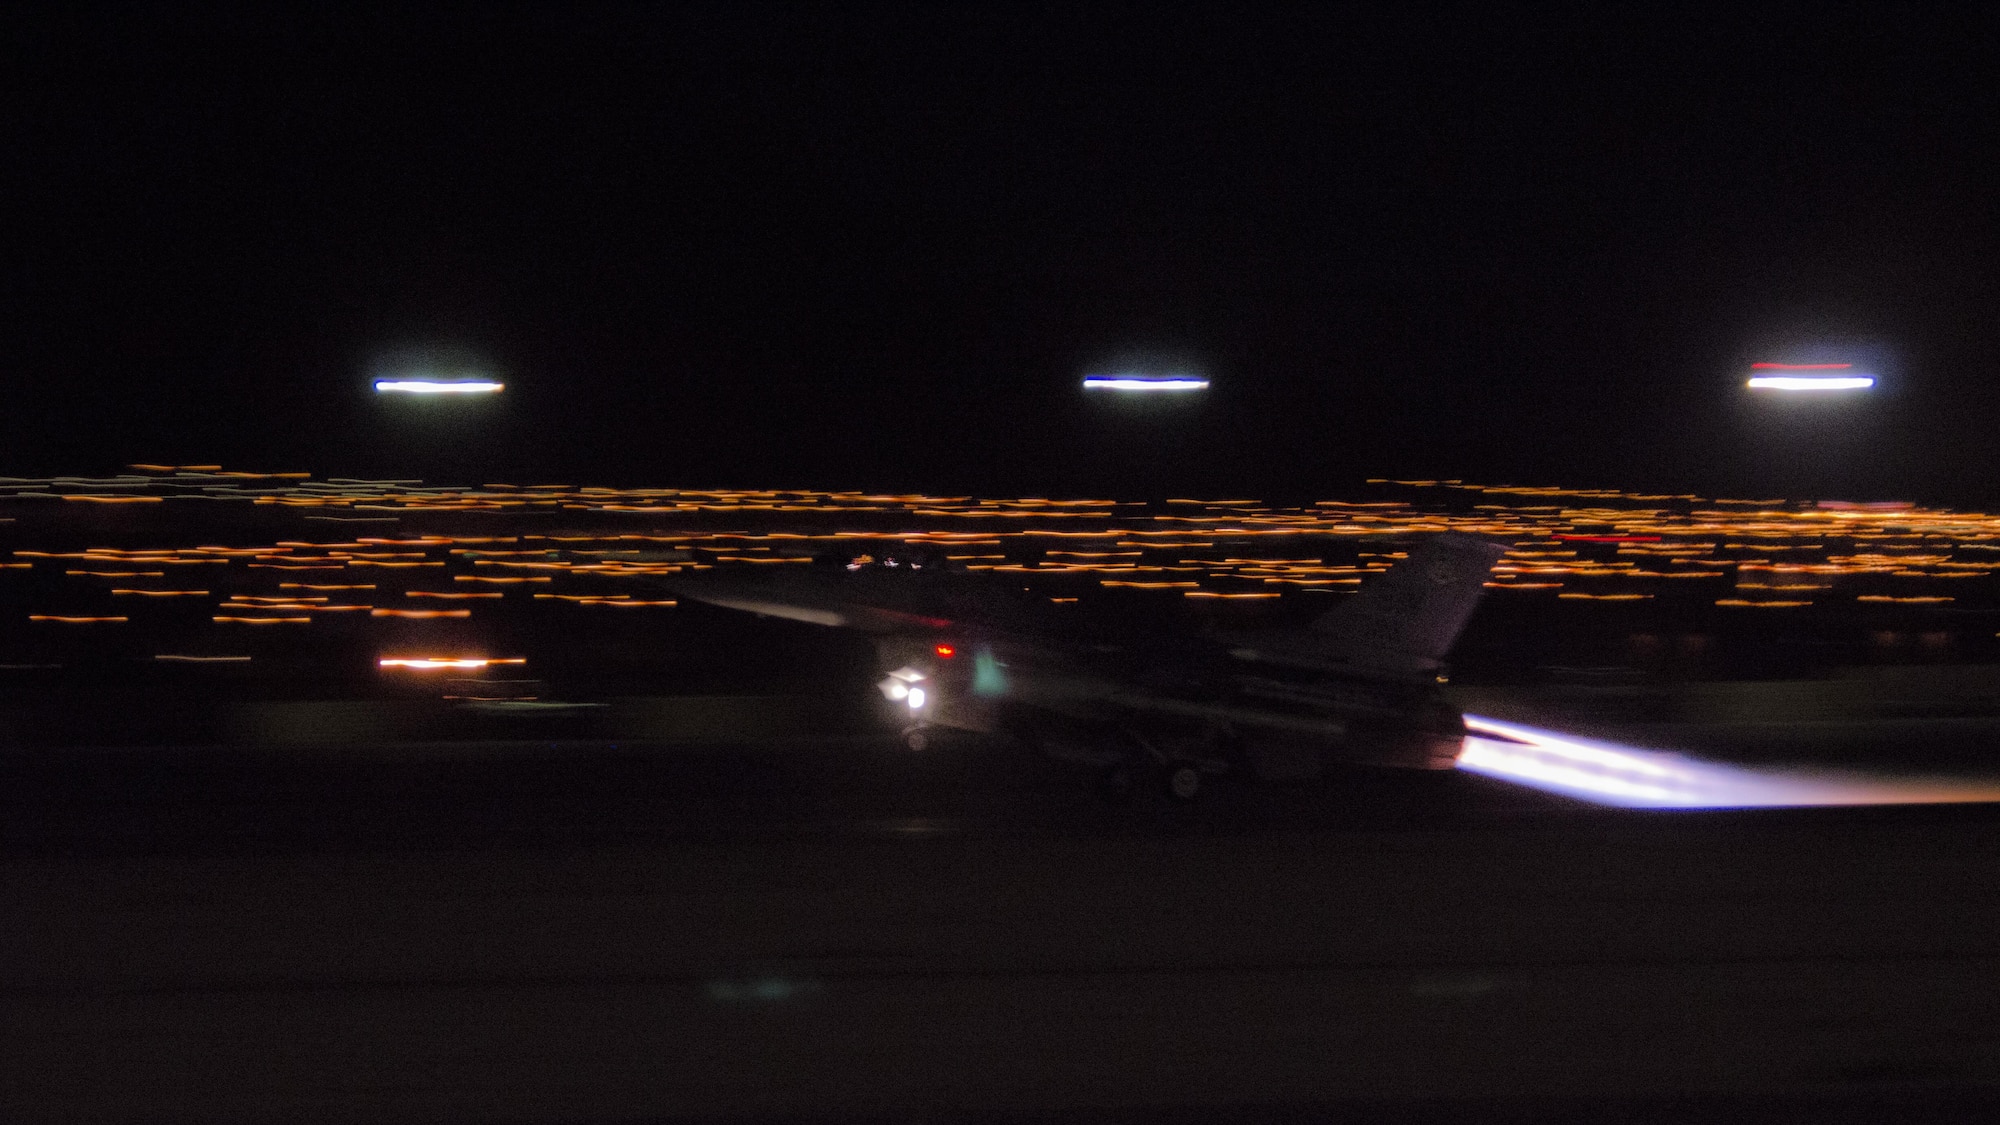 An F-16CM Fighting Falcon from the 55th Fighter Squadron, Shaw Air Force Base, S.C., takes off while conducting a night sortie during exercise Red Flag 16-4 at Nellis AFB, Nev., Aug. 17, 2016. The 55th FS played a key role during the exercise by providing suppression of enemy air defenses. (U. S. Air Force photo by Tech. Sgt. Frank Miller)